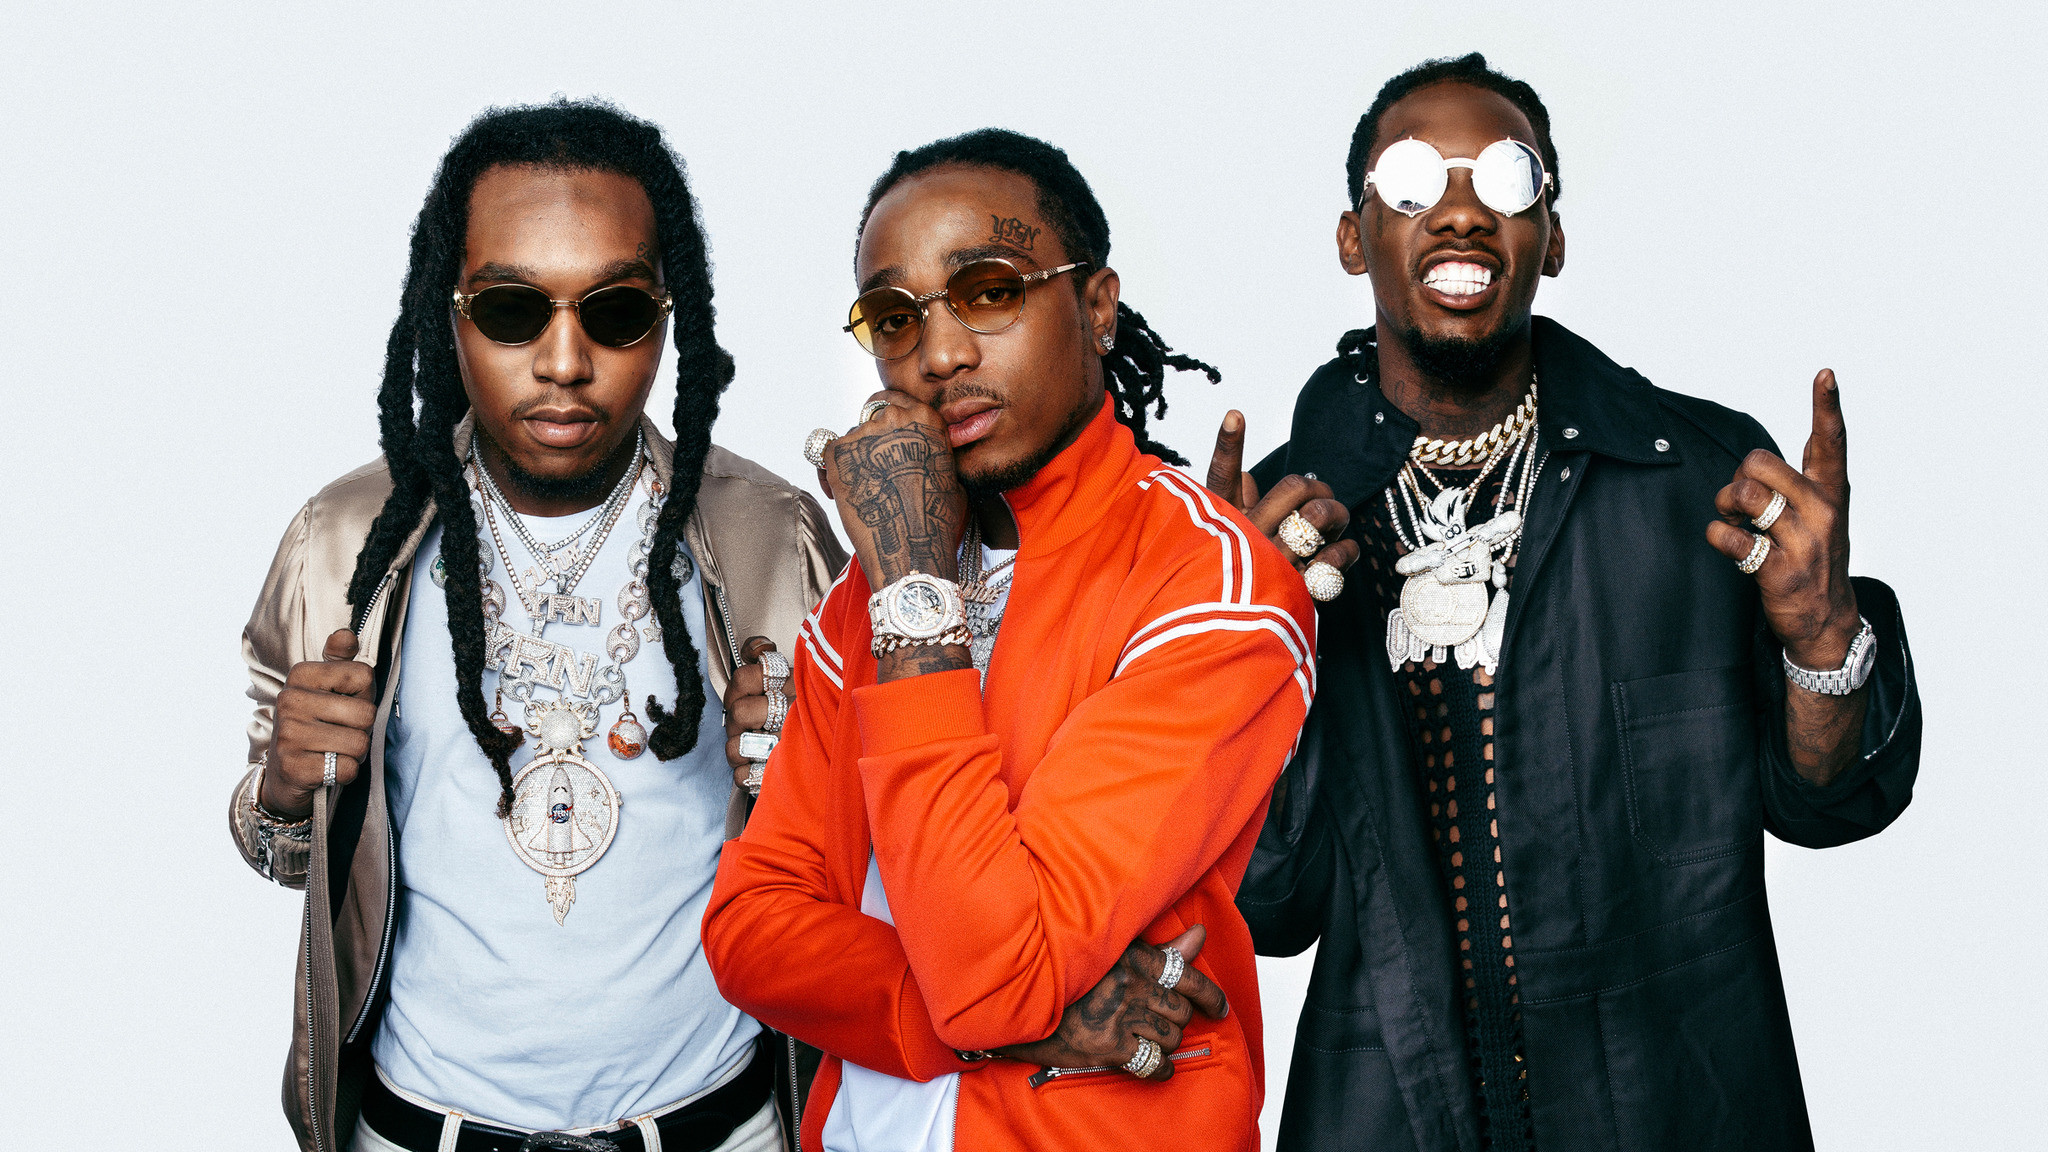 migos wallpaper,people,social group,youth,cool,fashion